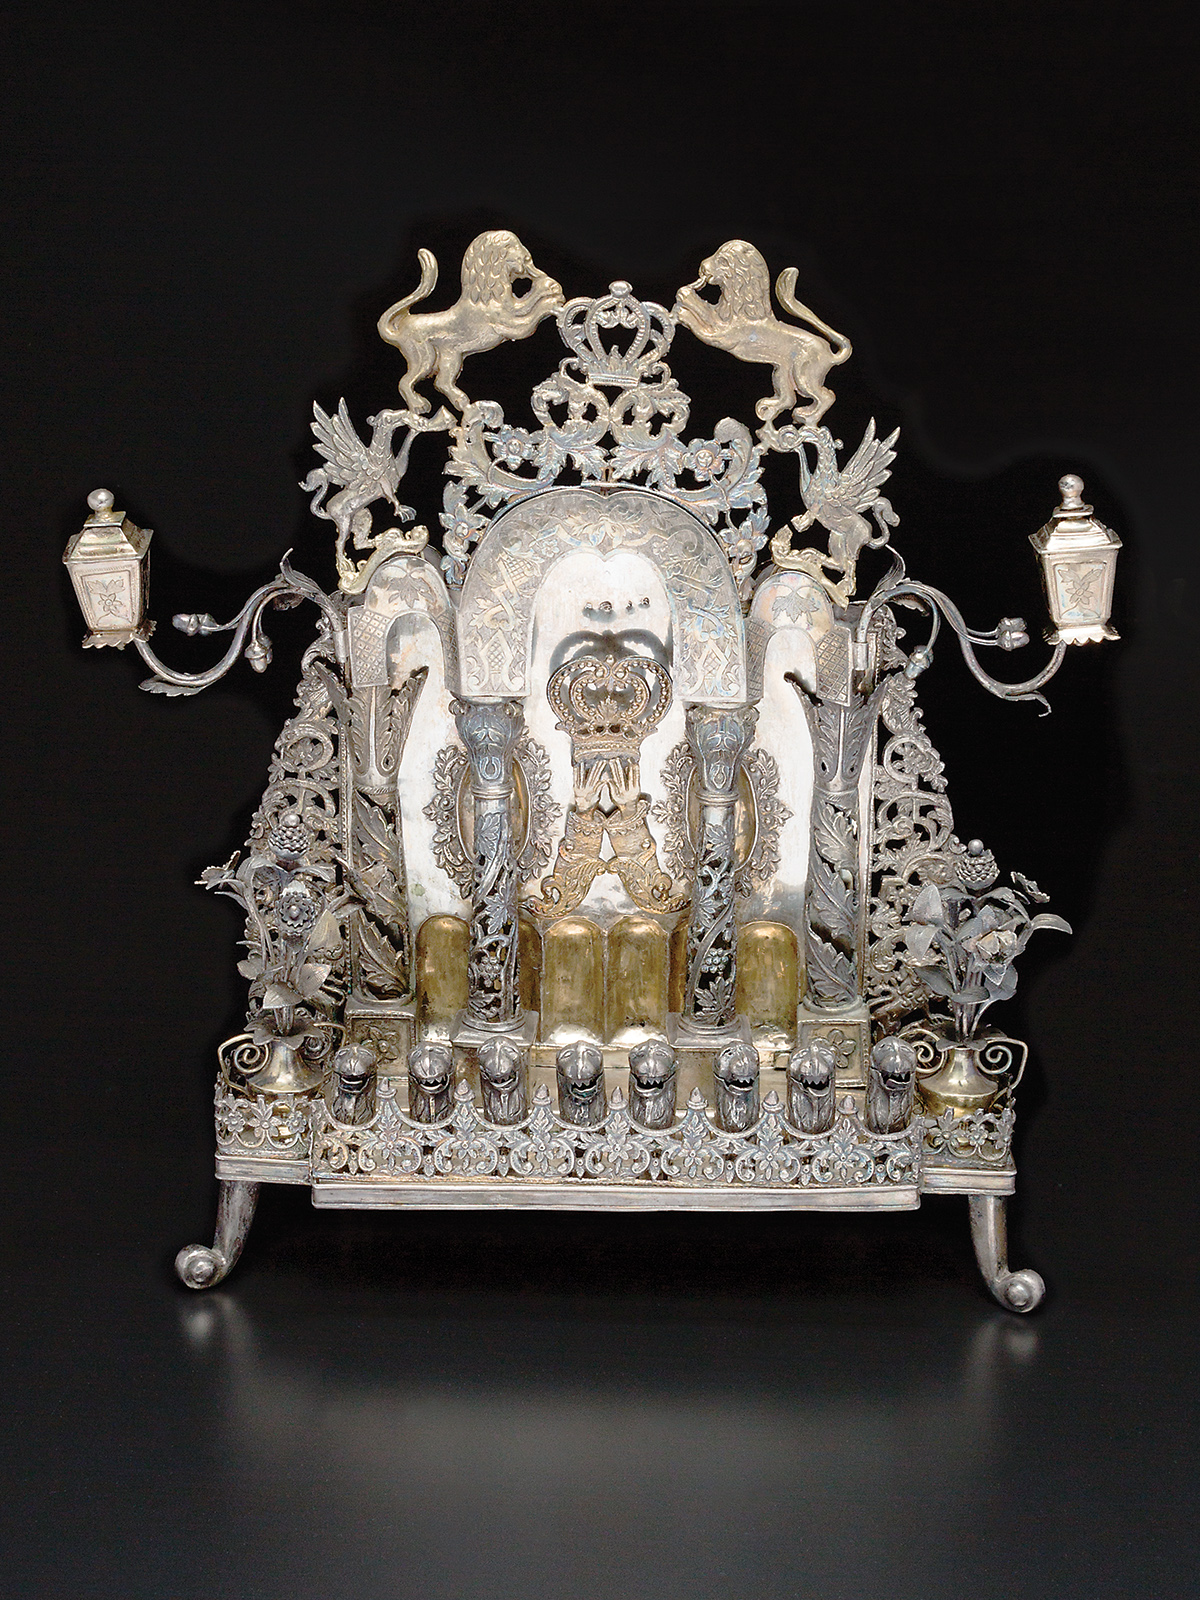 Ukrainian Silver Chanukah Lamp. <p>From the Collection of Michael & Judy Steinhardt. <p>c. 1850. <p>Sold at auction 7th April, 2016. <p>Hammer-price: $35,000. 